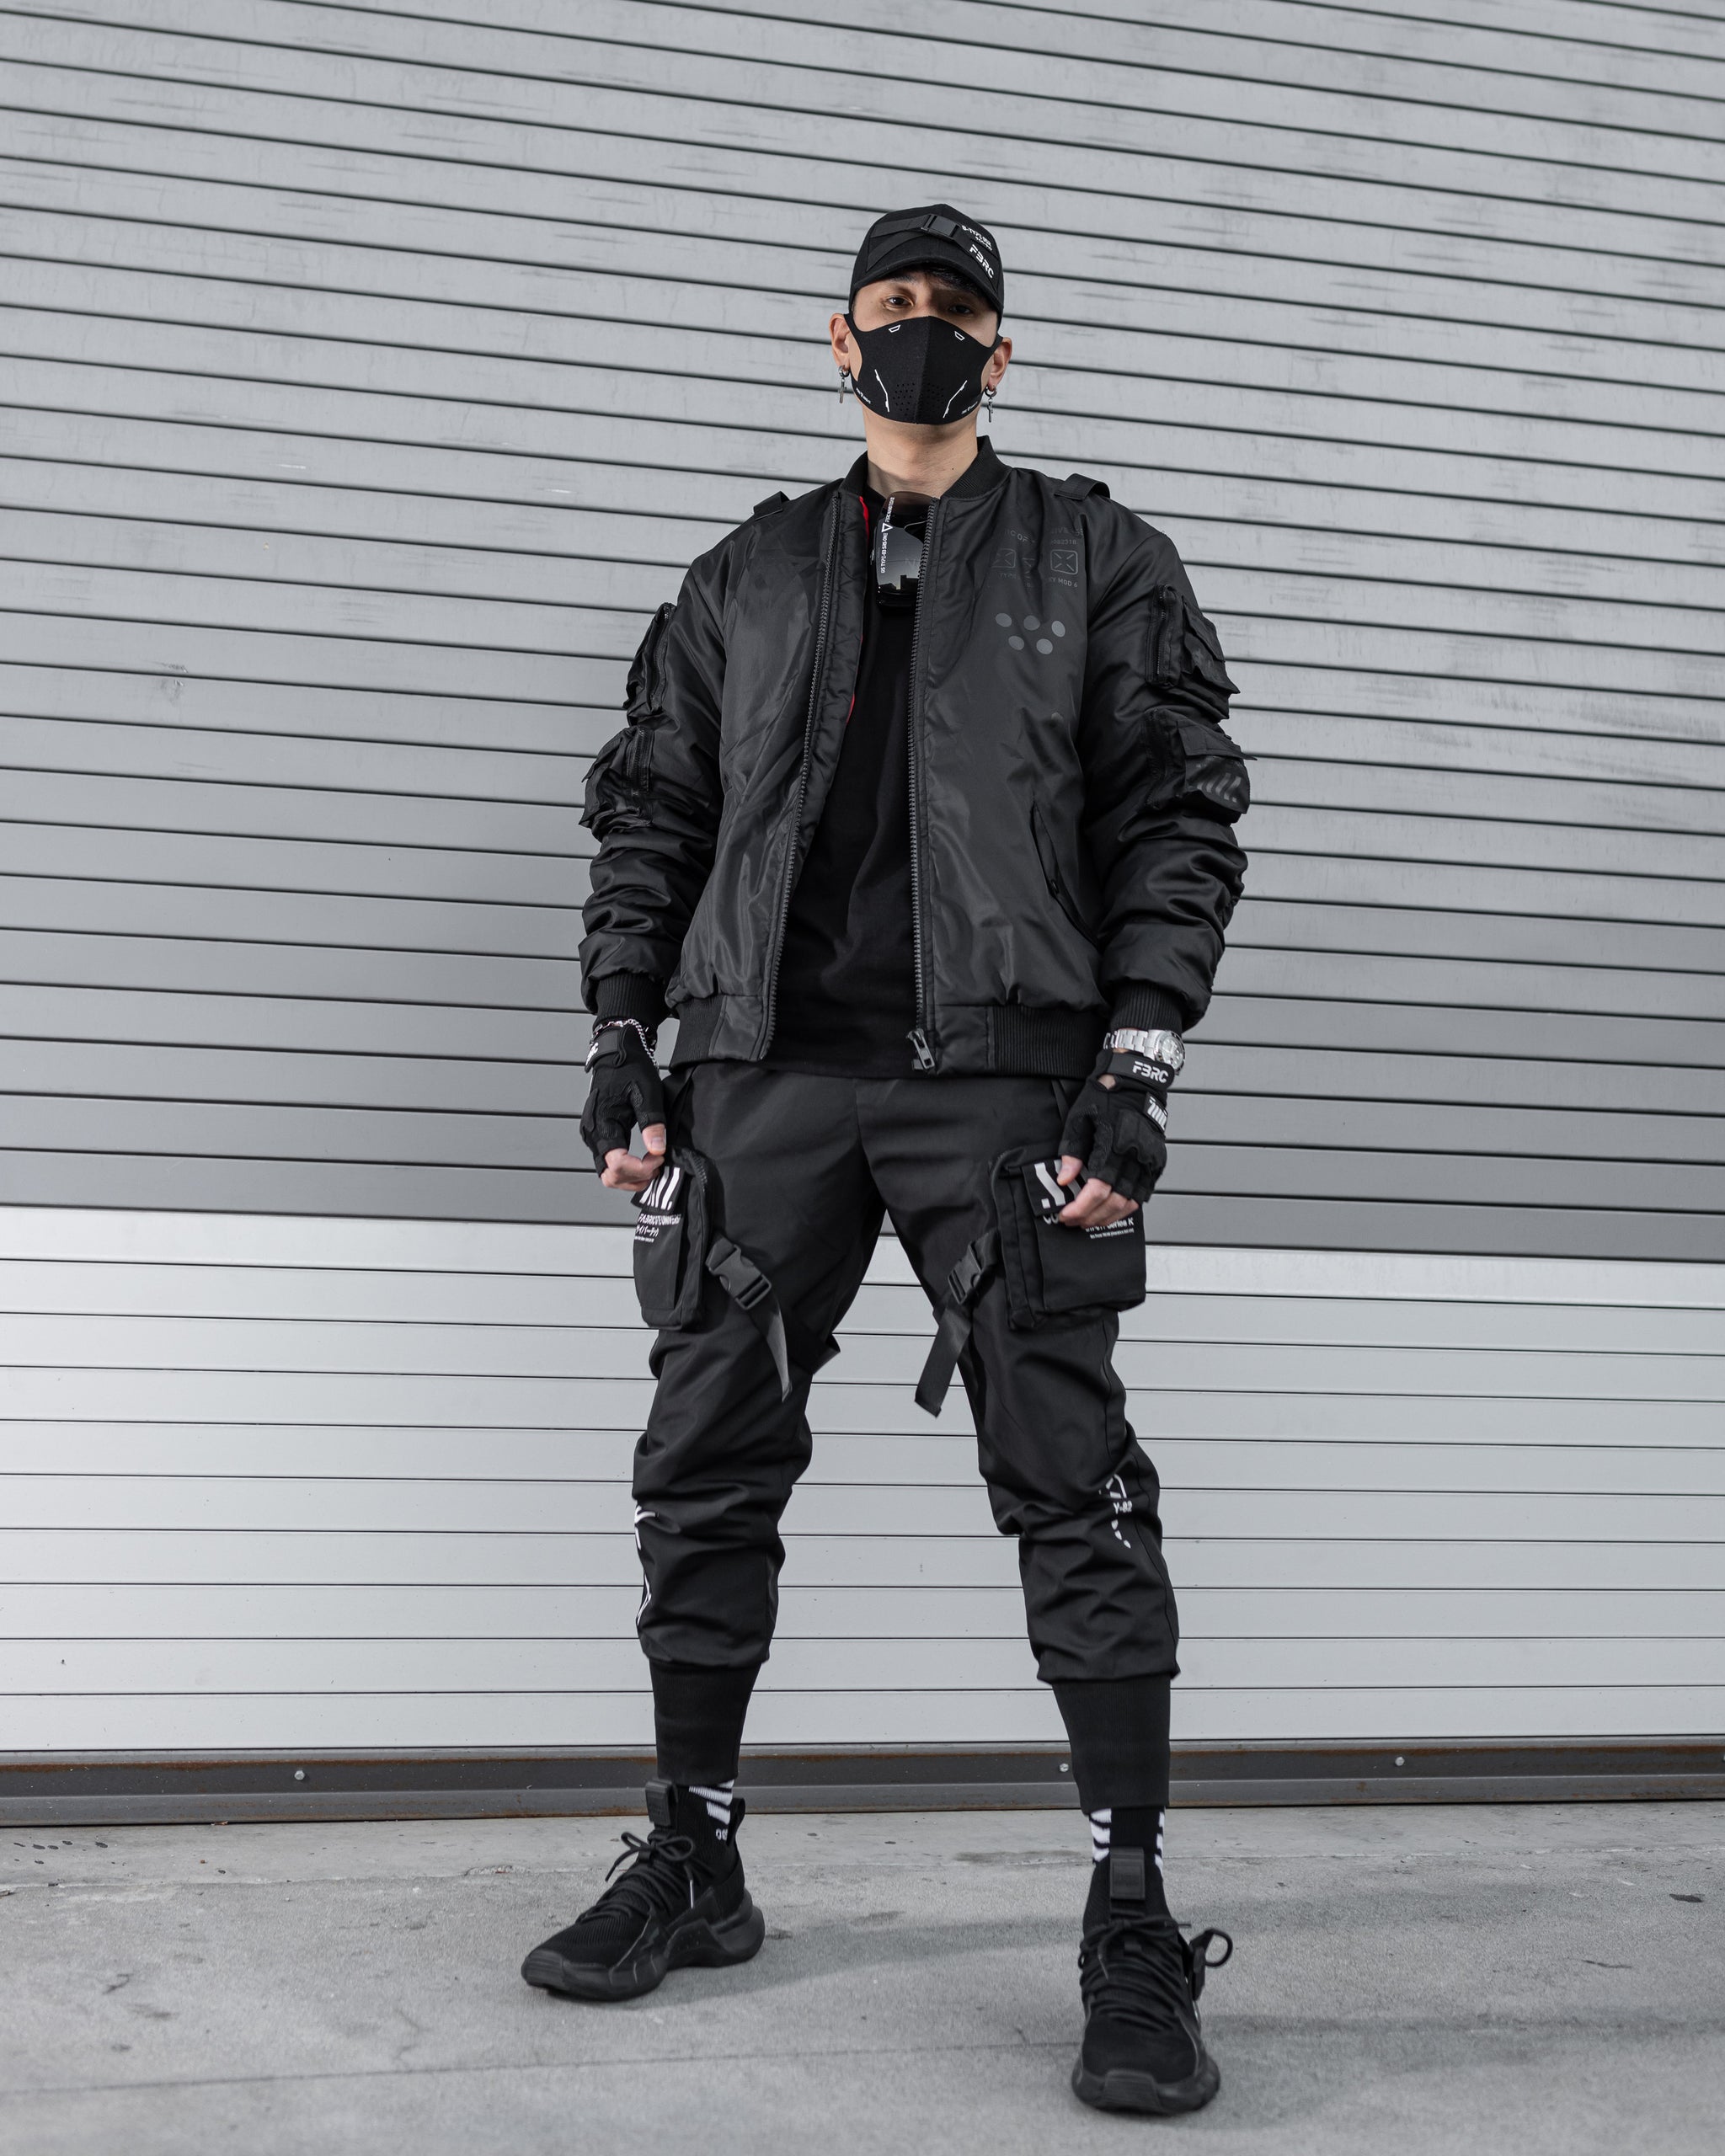 XB-03 Stealth Black Bomber Jacket - Fabric of the Universe